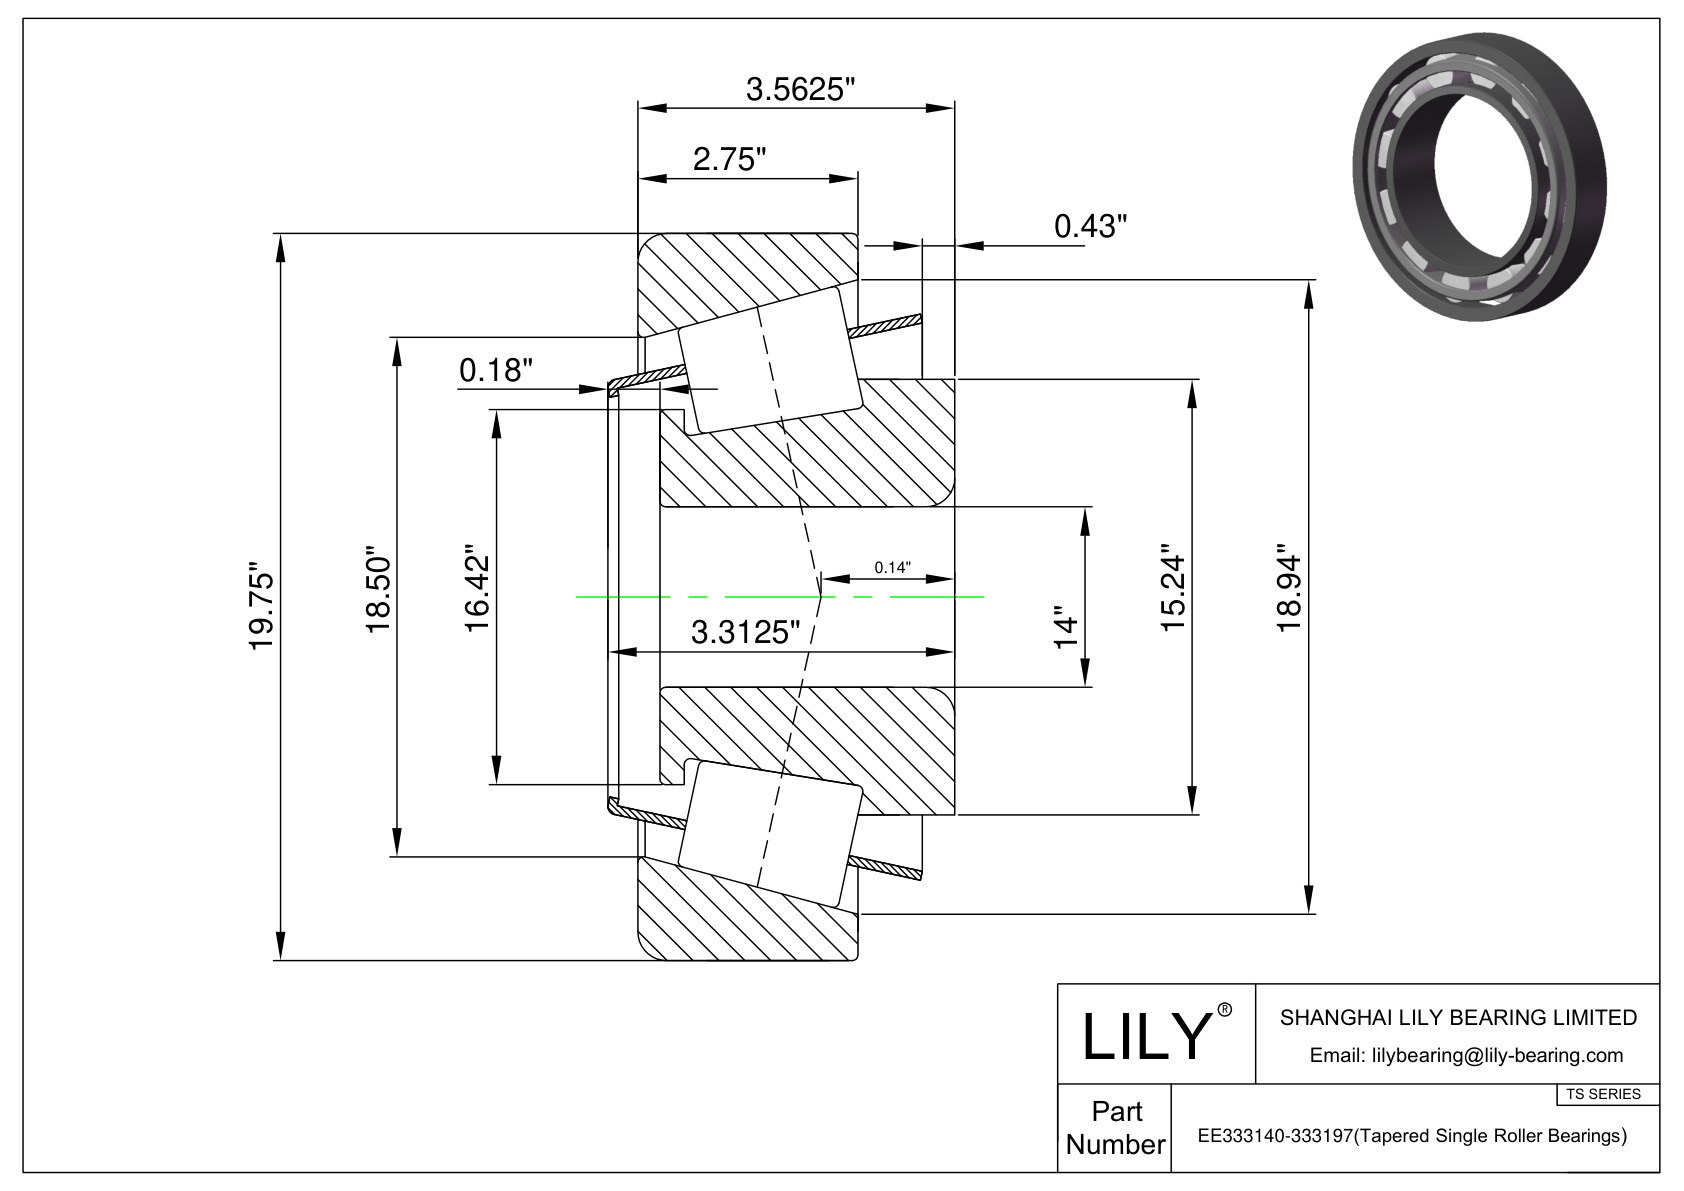 EE333140-333197 TS (Tapered Single Roller Bearings) (Imperial) cad drawing